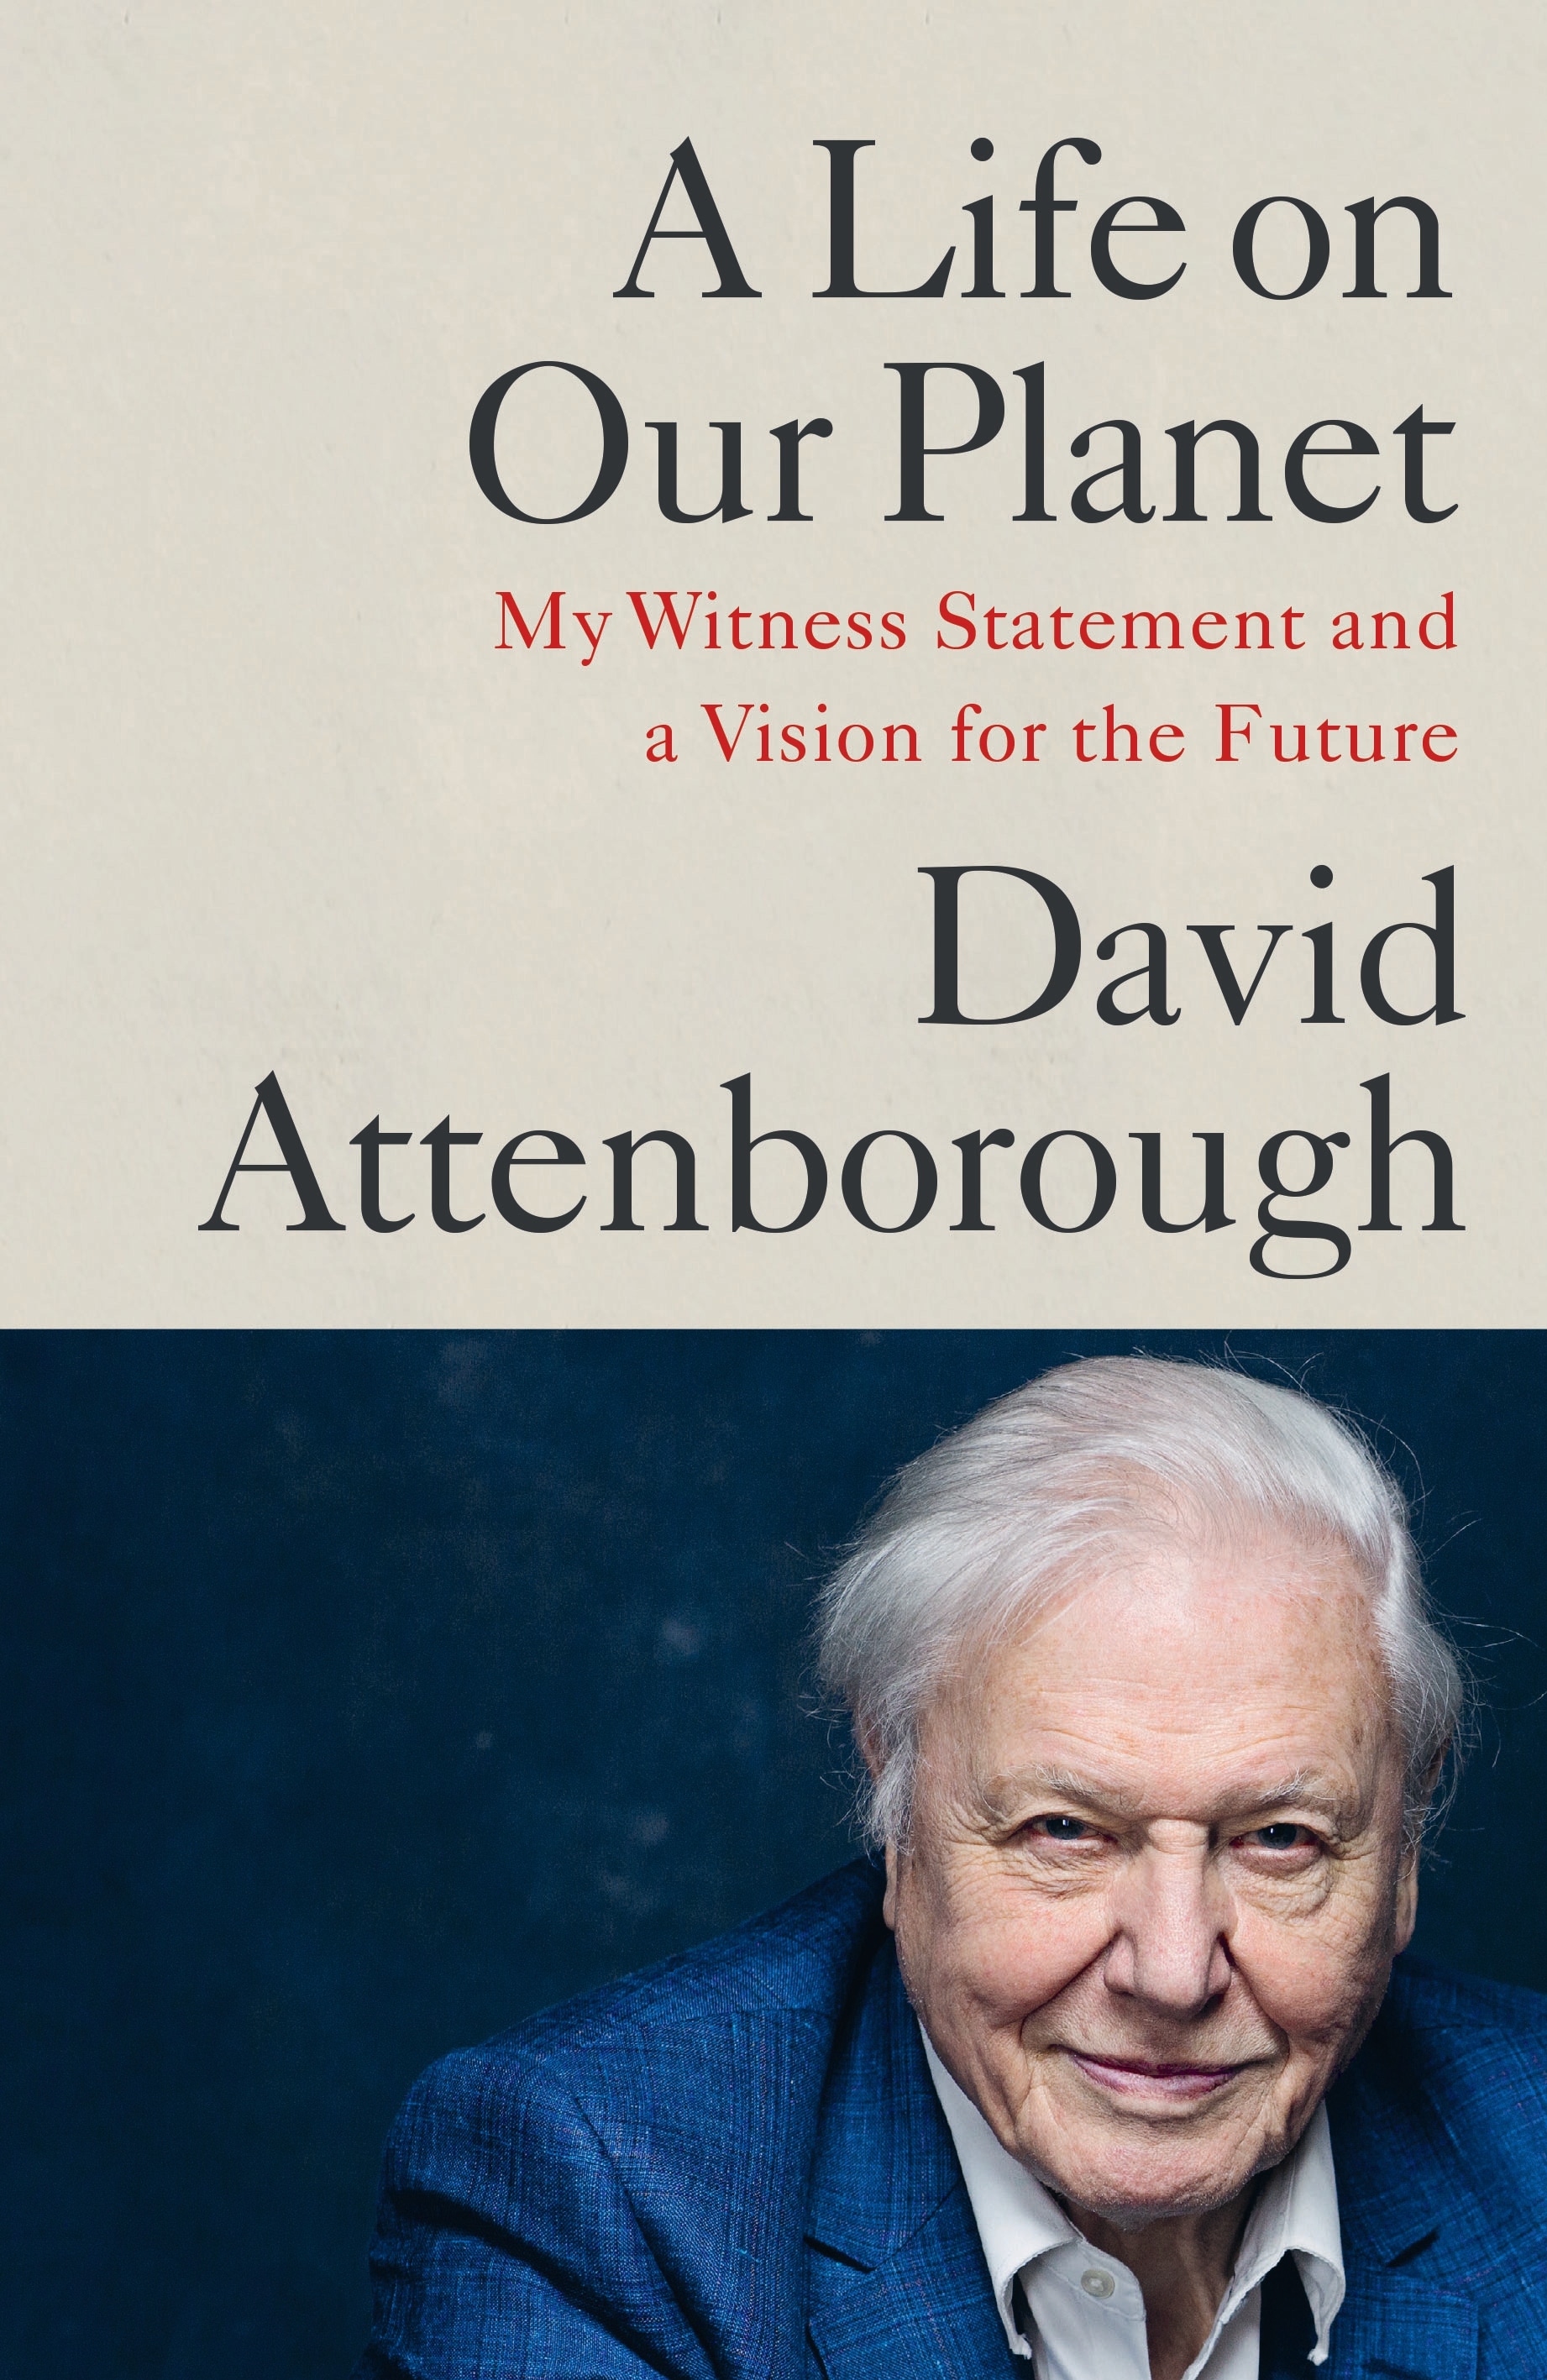 Book “A Life on Our Planet” by David Attenborough — October 1, 2020